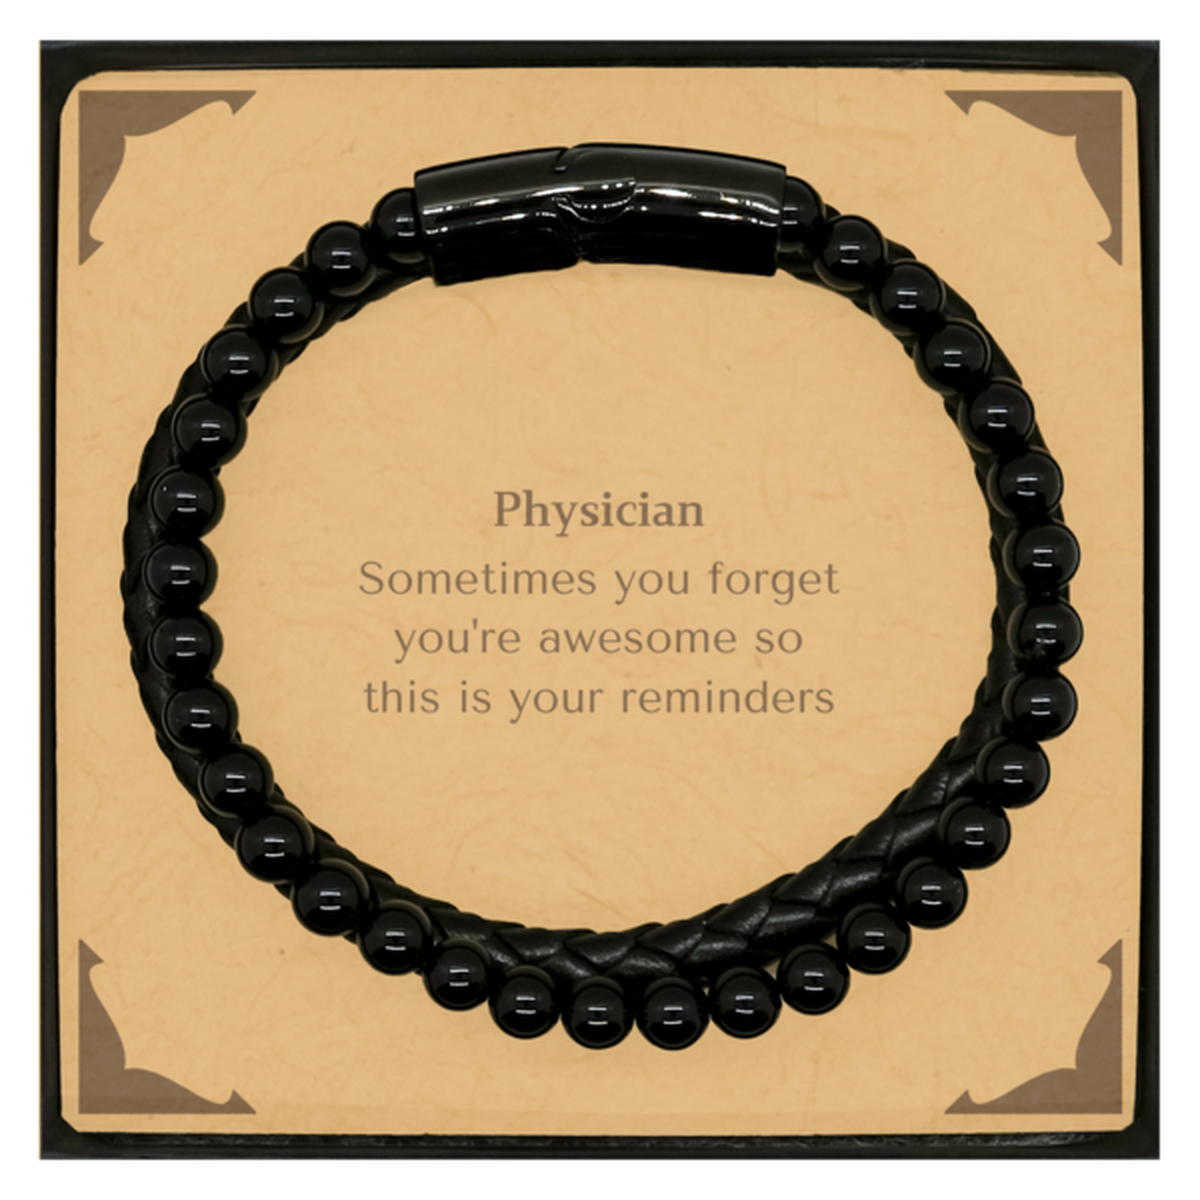 Sentimental Physician Stone Leather Bracelets, Physician Sometimes you forget you're awesome so this is your reminders, Graduation Christmas Birthday Gifts for Physician, Men, Women, Coworkers